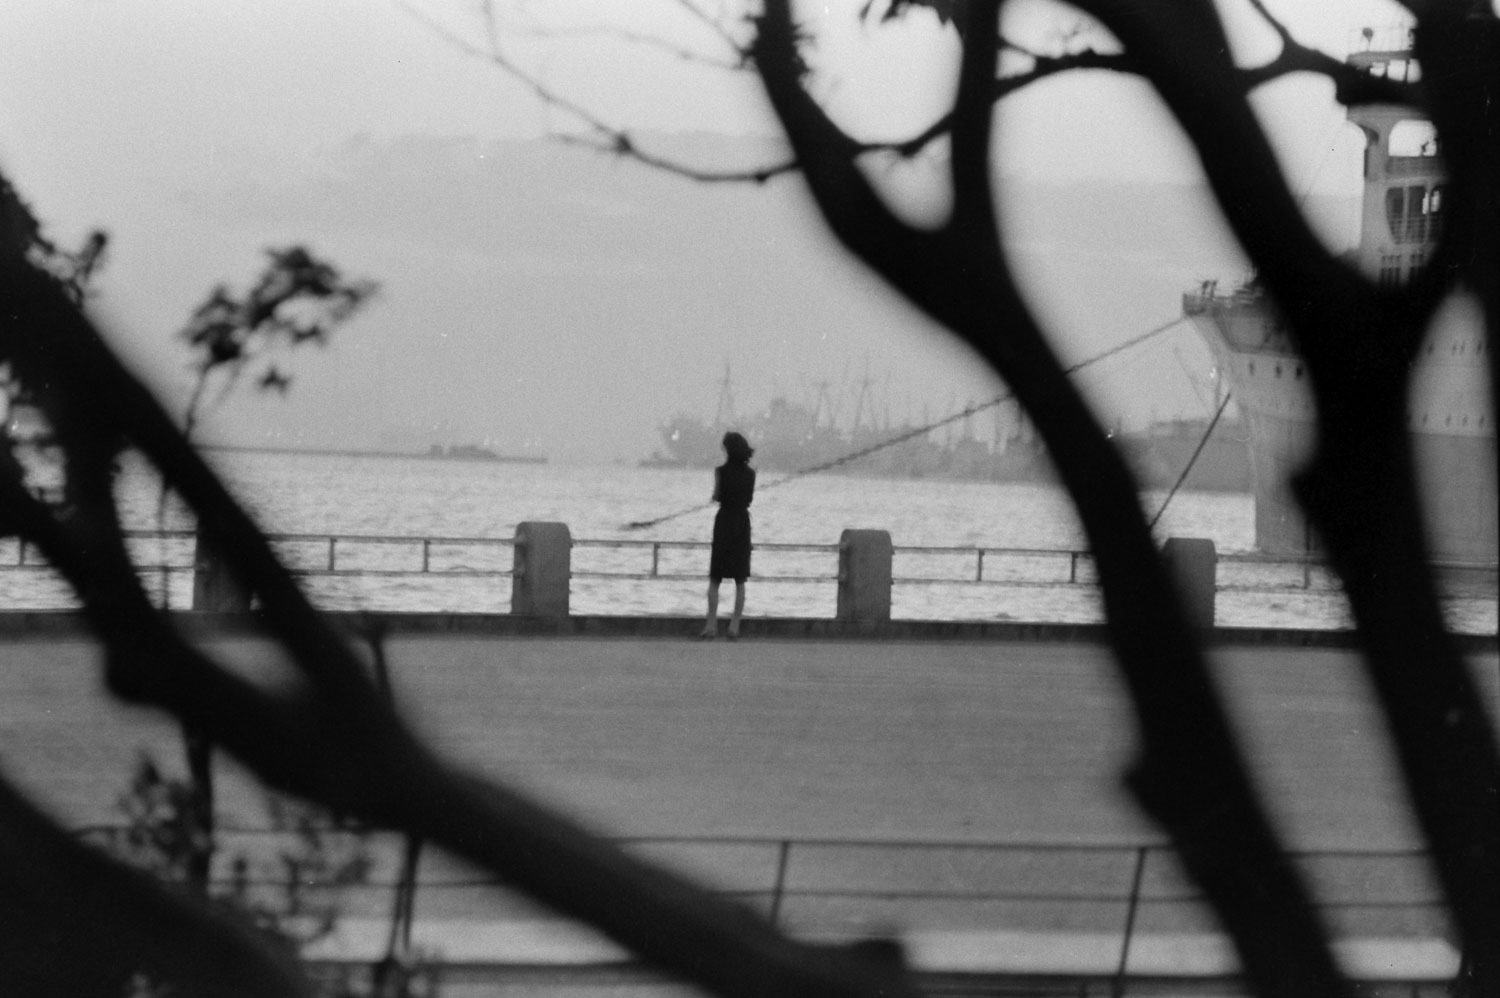 "Sometimes [Yoko] goes down to the port in Yokohama to watch the ships sail off to the places she only wishes she cold go. At sunset, her 'day' begins again."